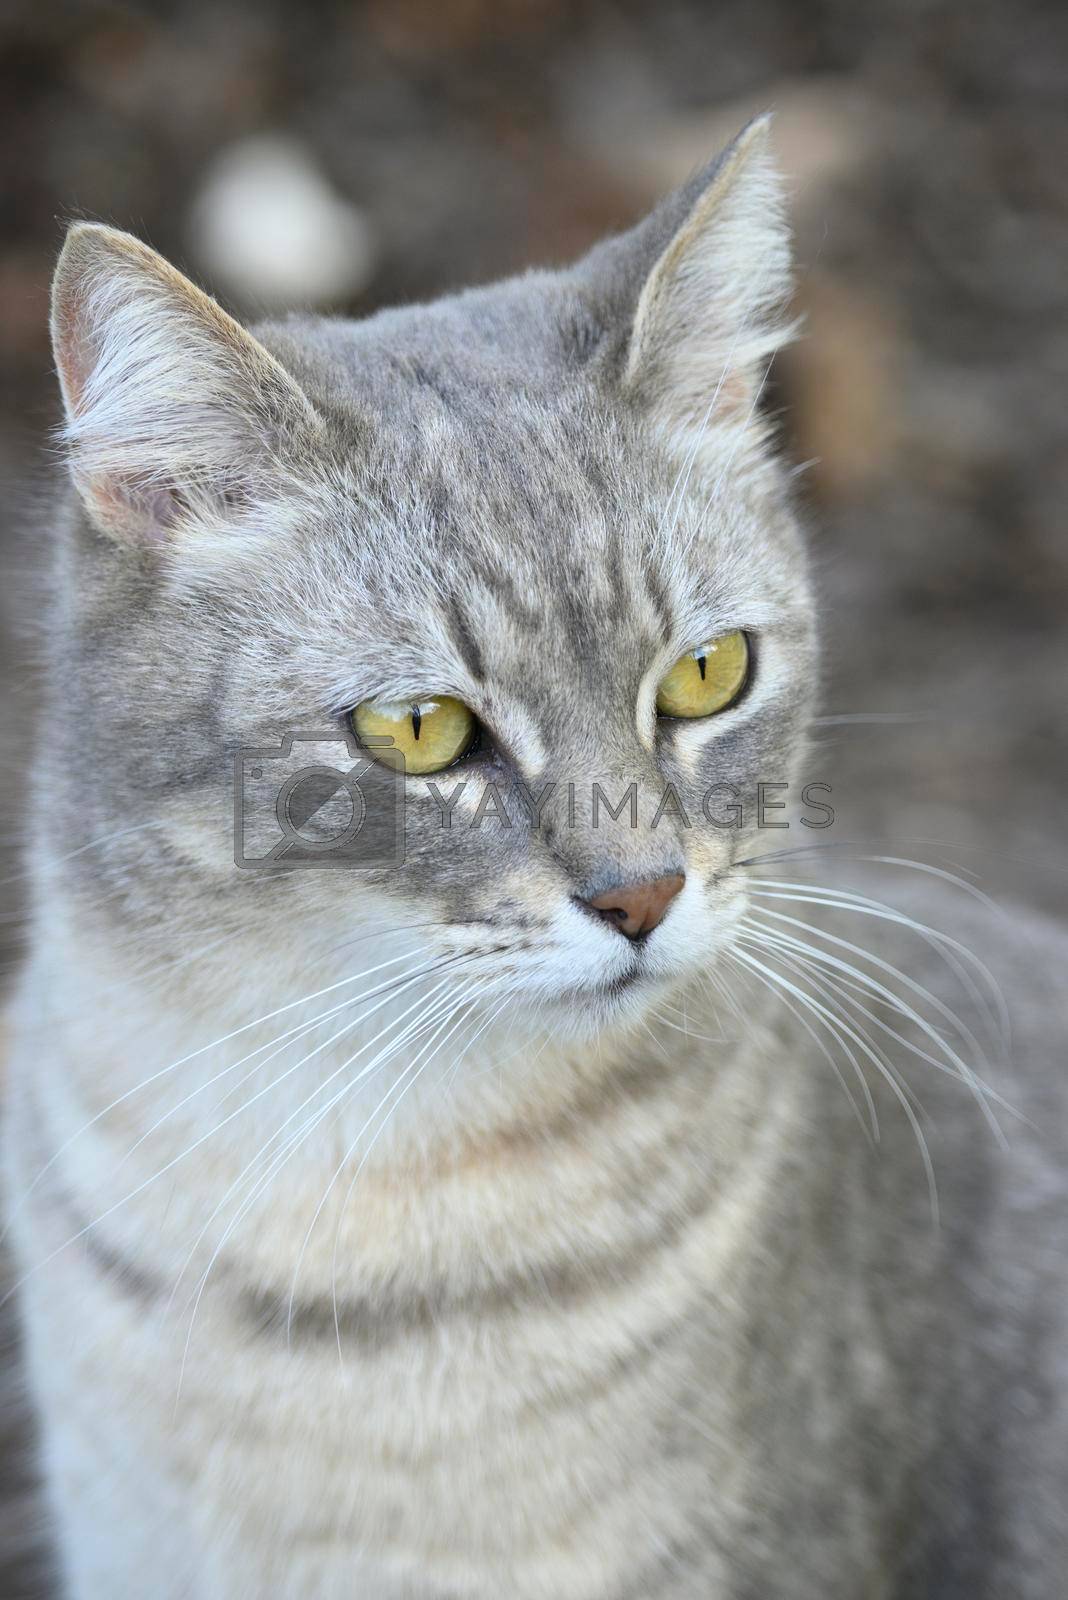 Royalty free image of Grey, striped domestic cat looking curious  by AlessandroZocc